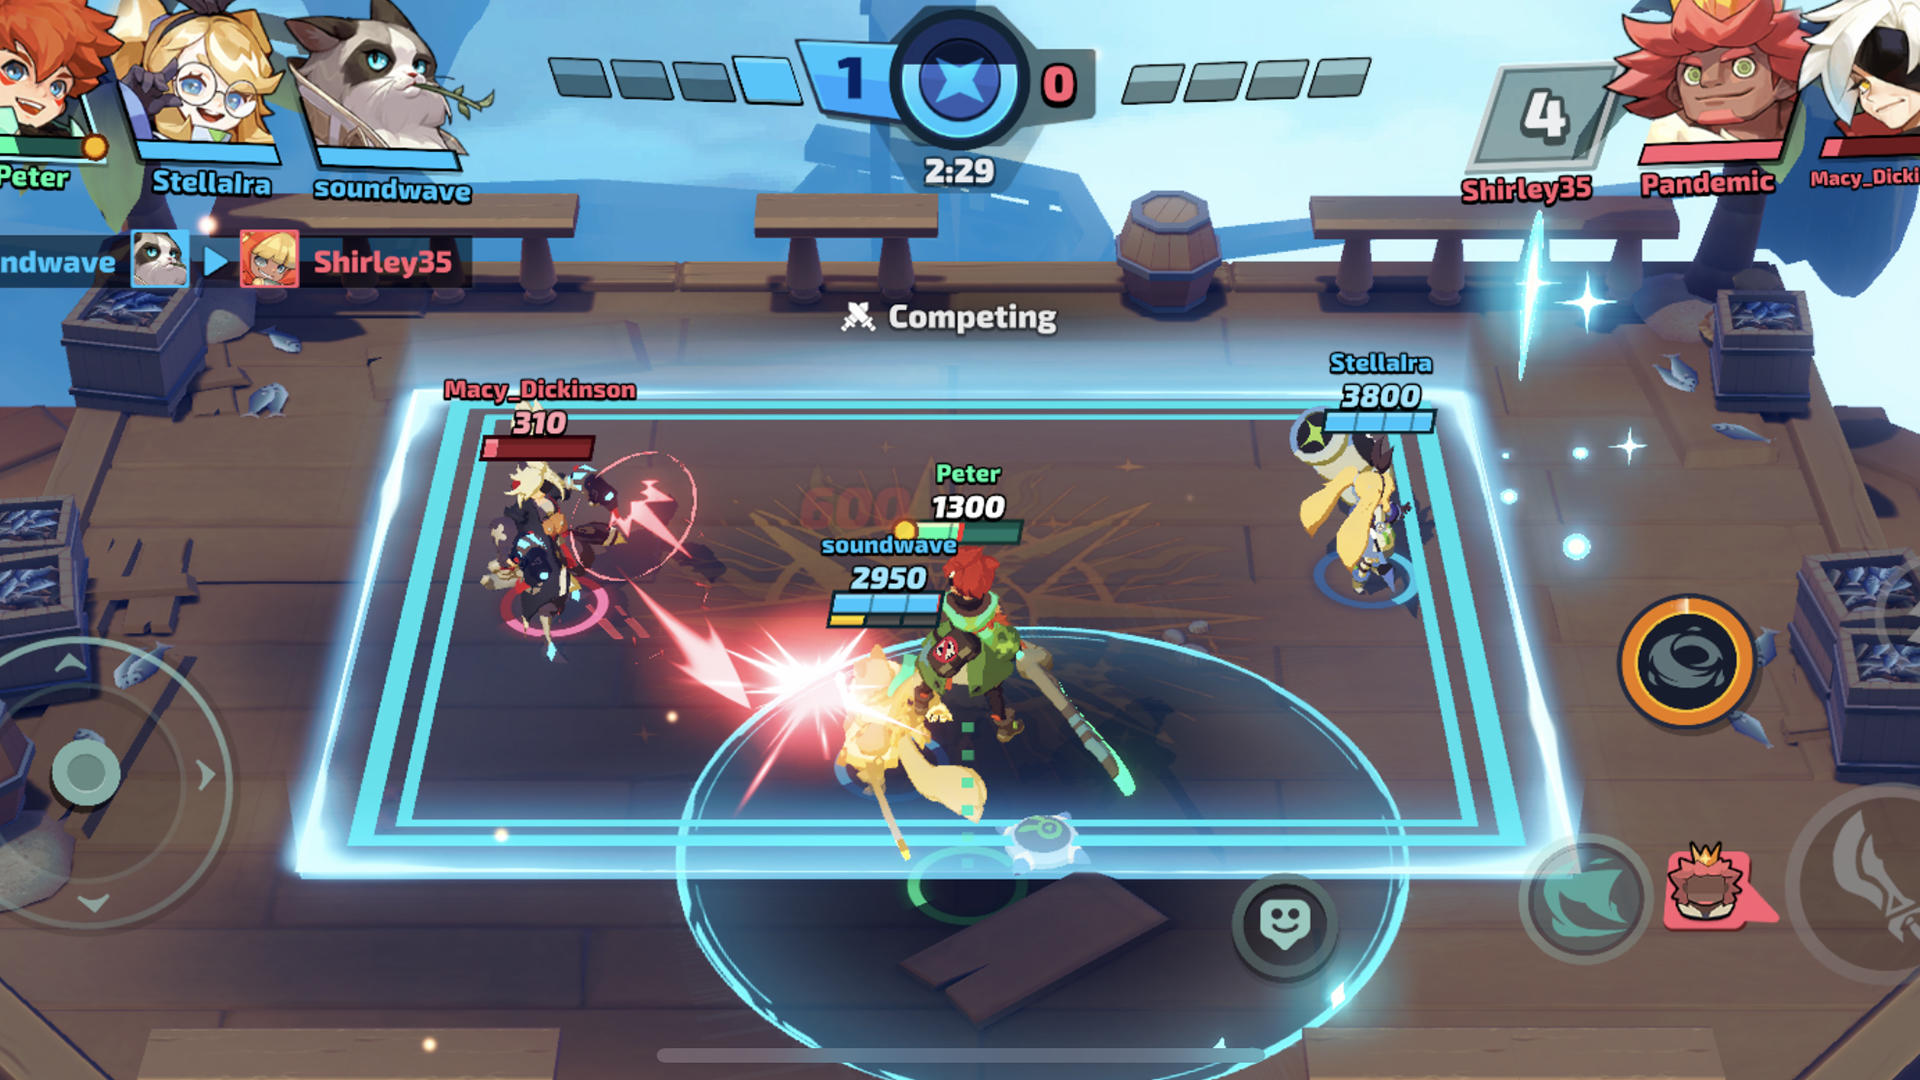 Download SMASH LEGENDS : Action Fight android on PC